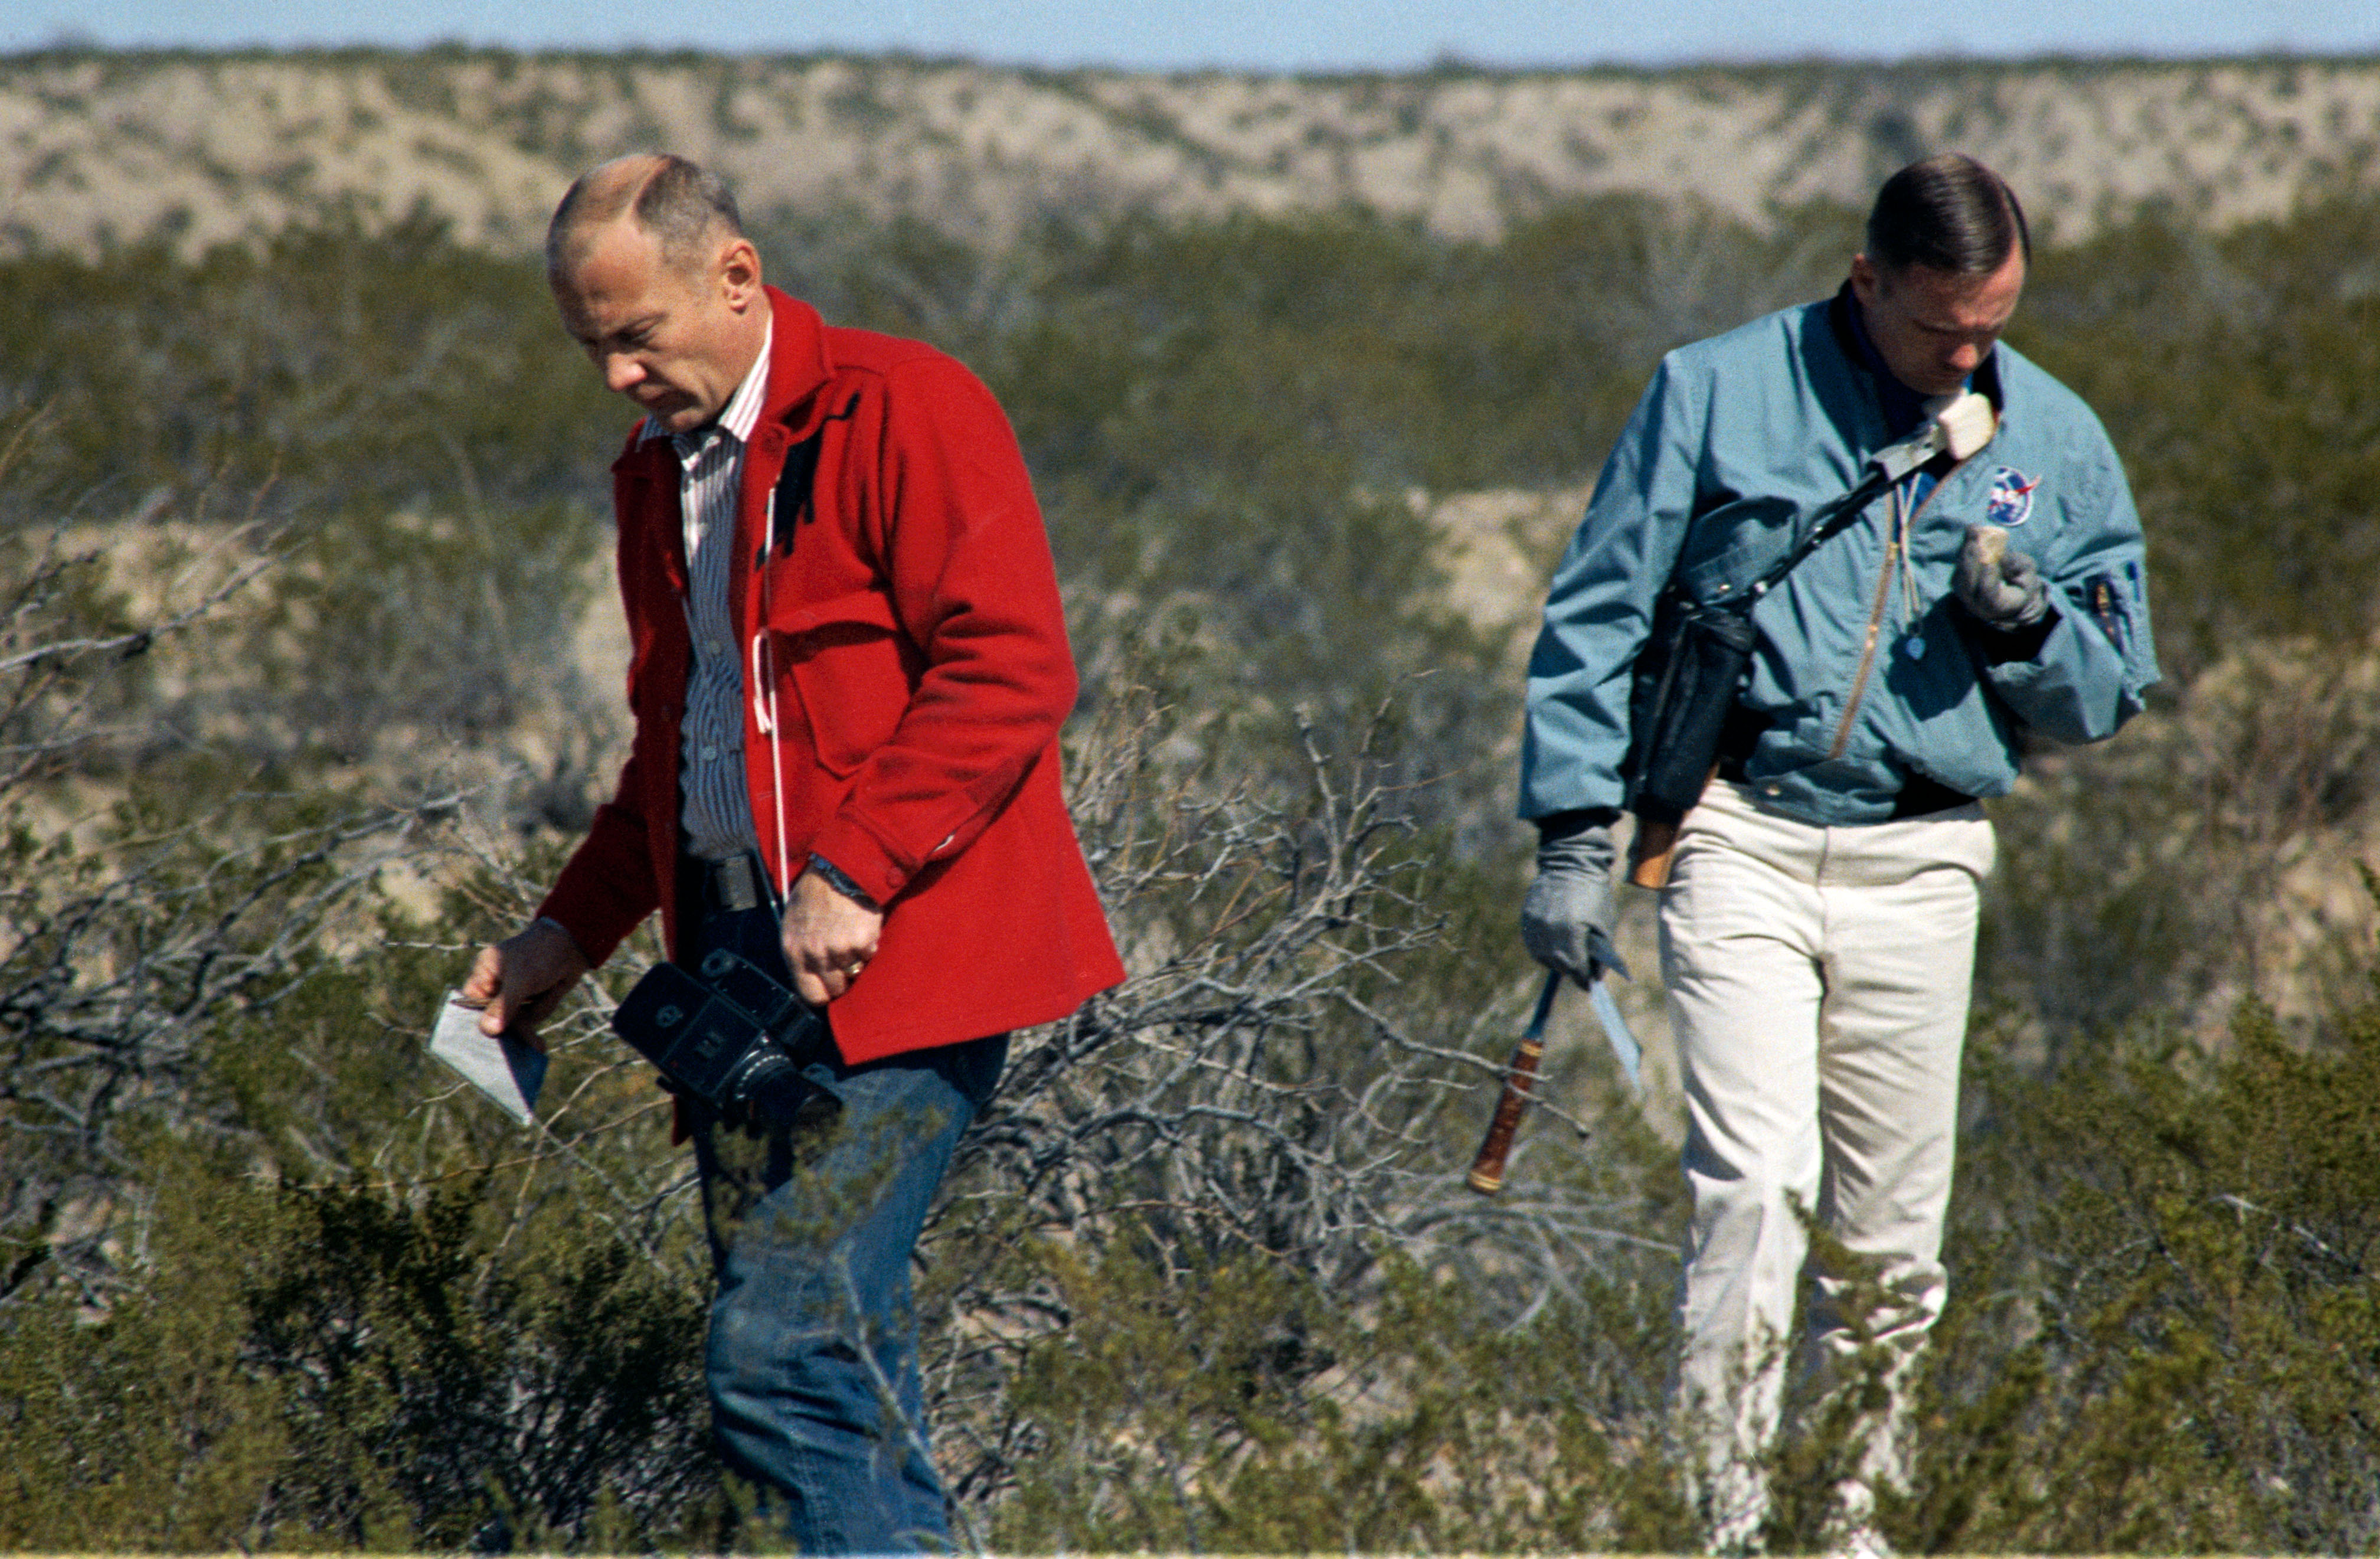 Apollo 11 astronauts Edwin E. “Buzz” Aldrin, left, and Neil A. Armstrong during geology training at Sierra Blanco, Texas